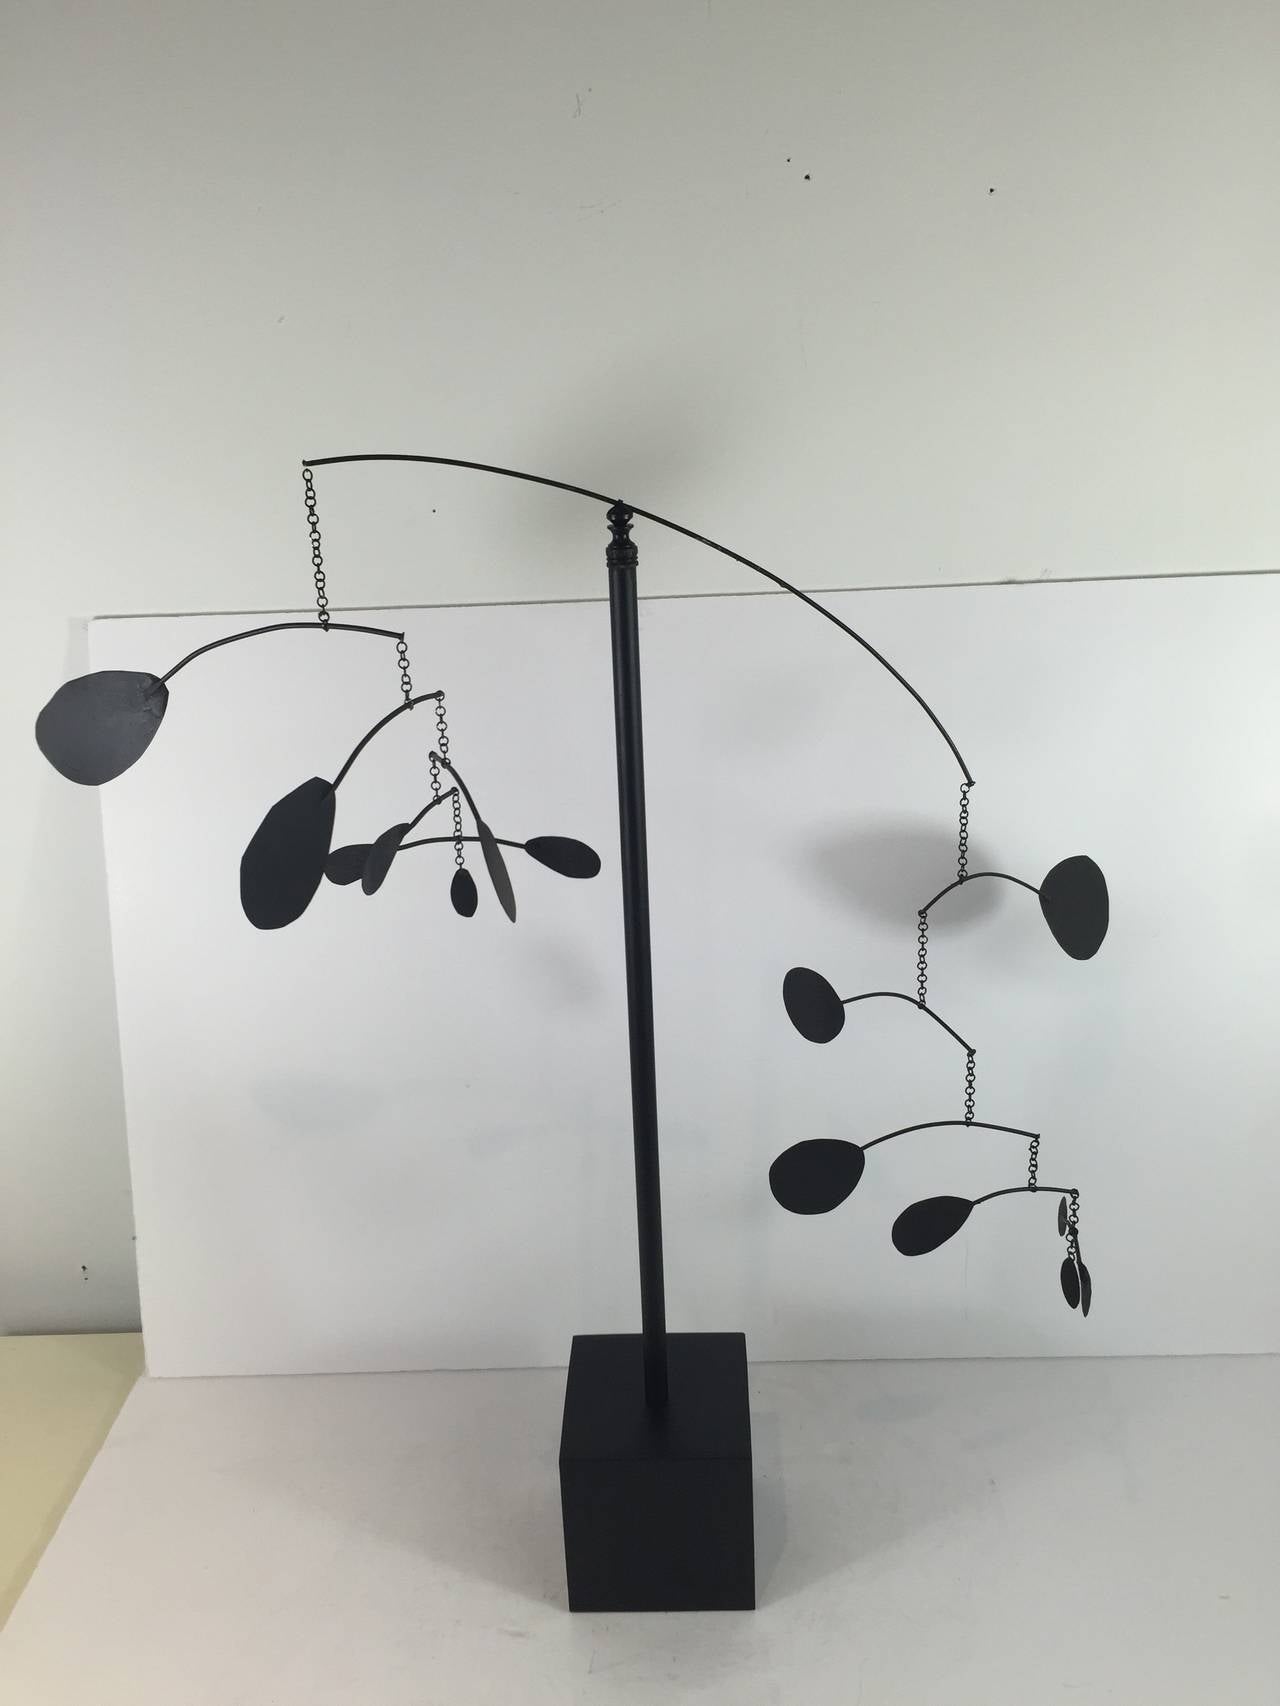 Large Vintage Table-Top Mobile-In the style of Alexander Calder, the kinetic mobile can rotate, constructed of metal resting on a wood rod inset in a square 4 inch x 4 inch steel cube. Each 